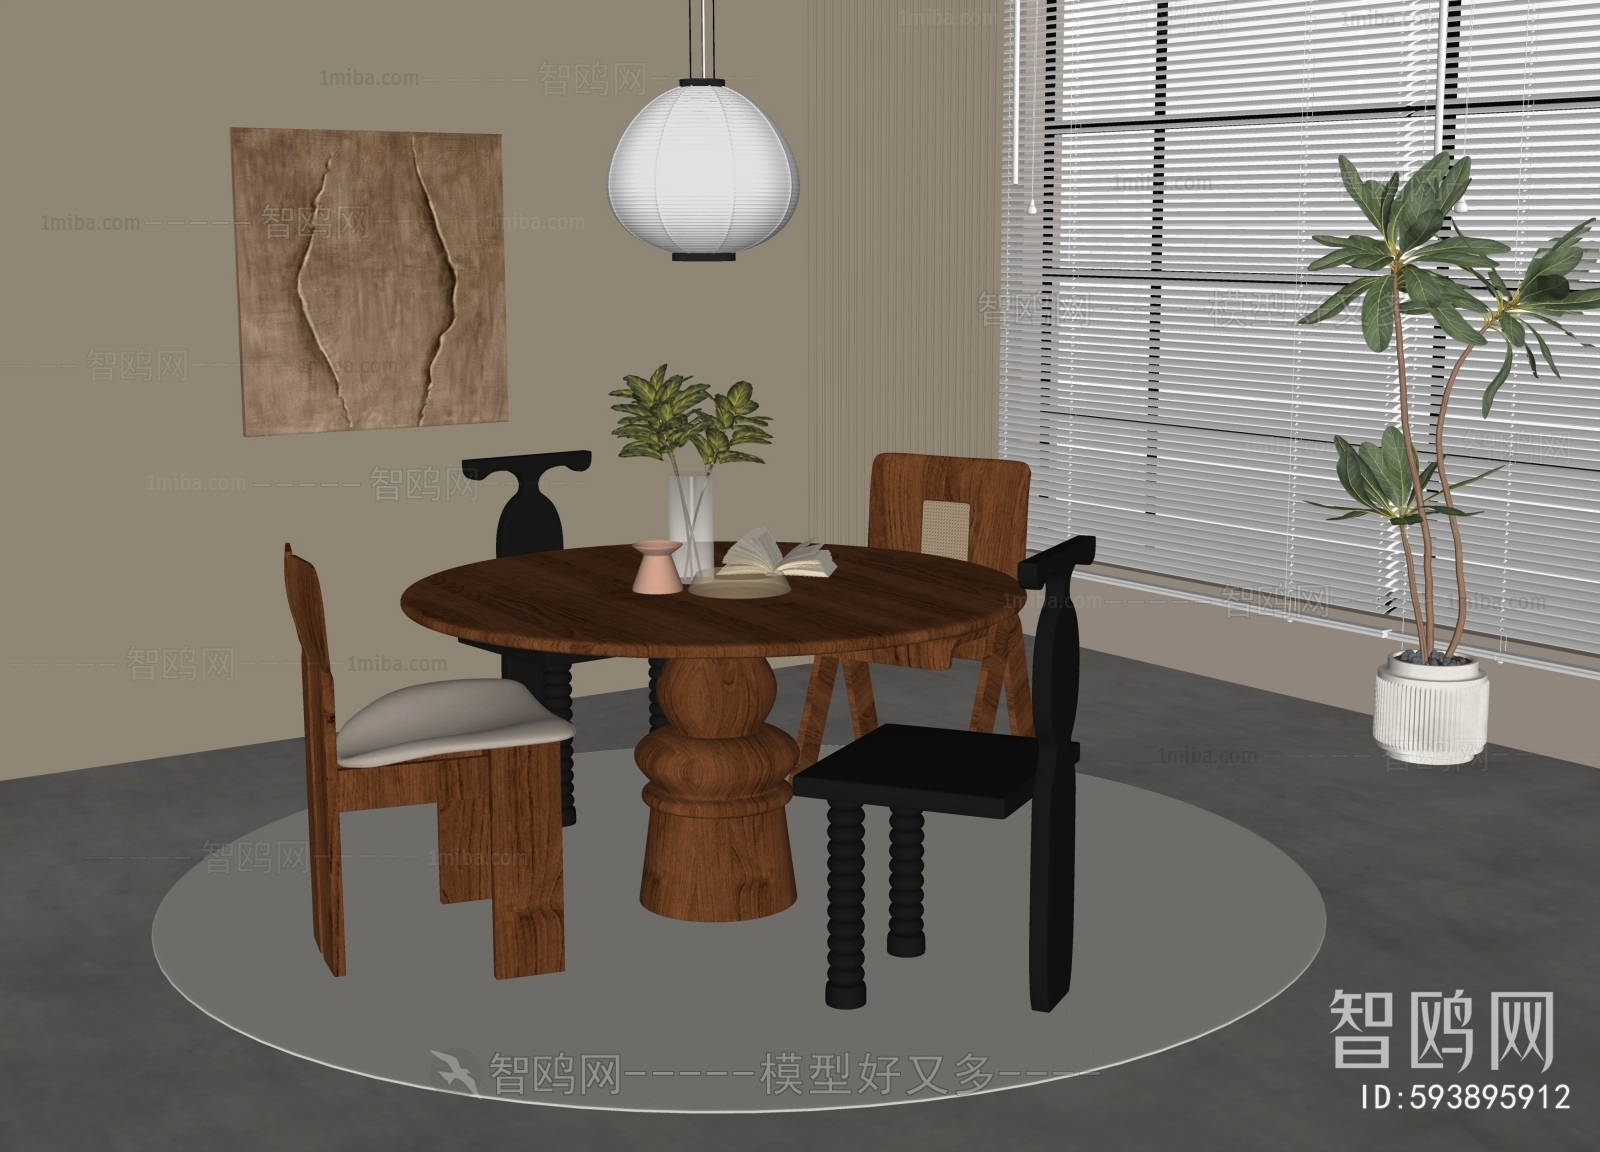 Modern Wabi-sabi Style Dining Table And Chairs